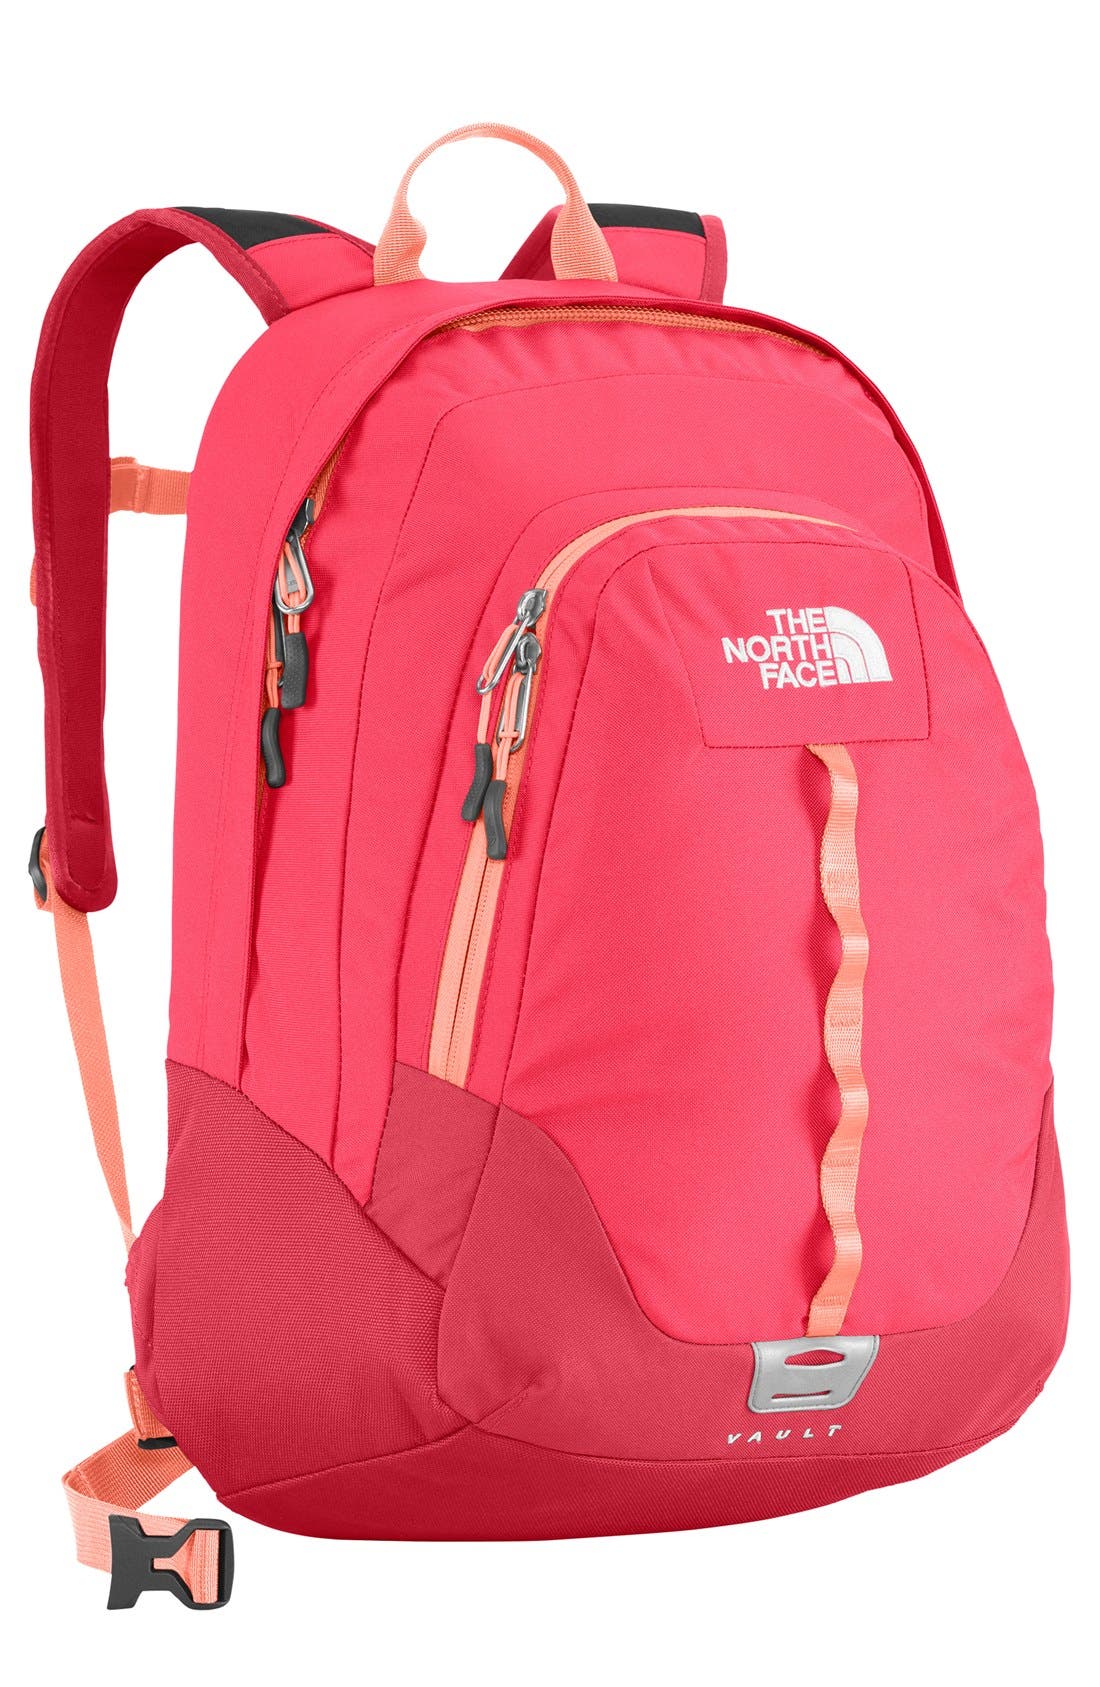 girls north face backpack